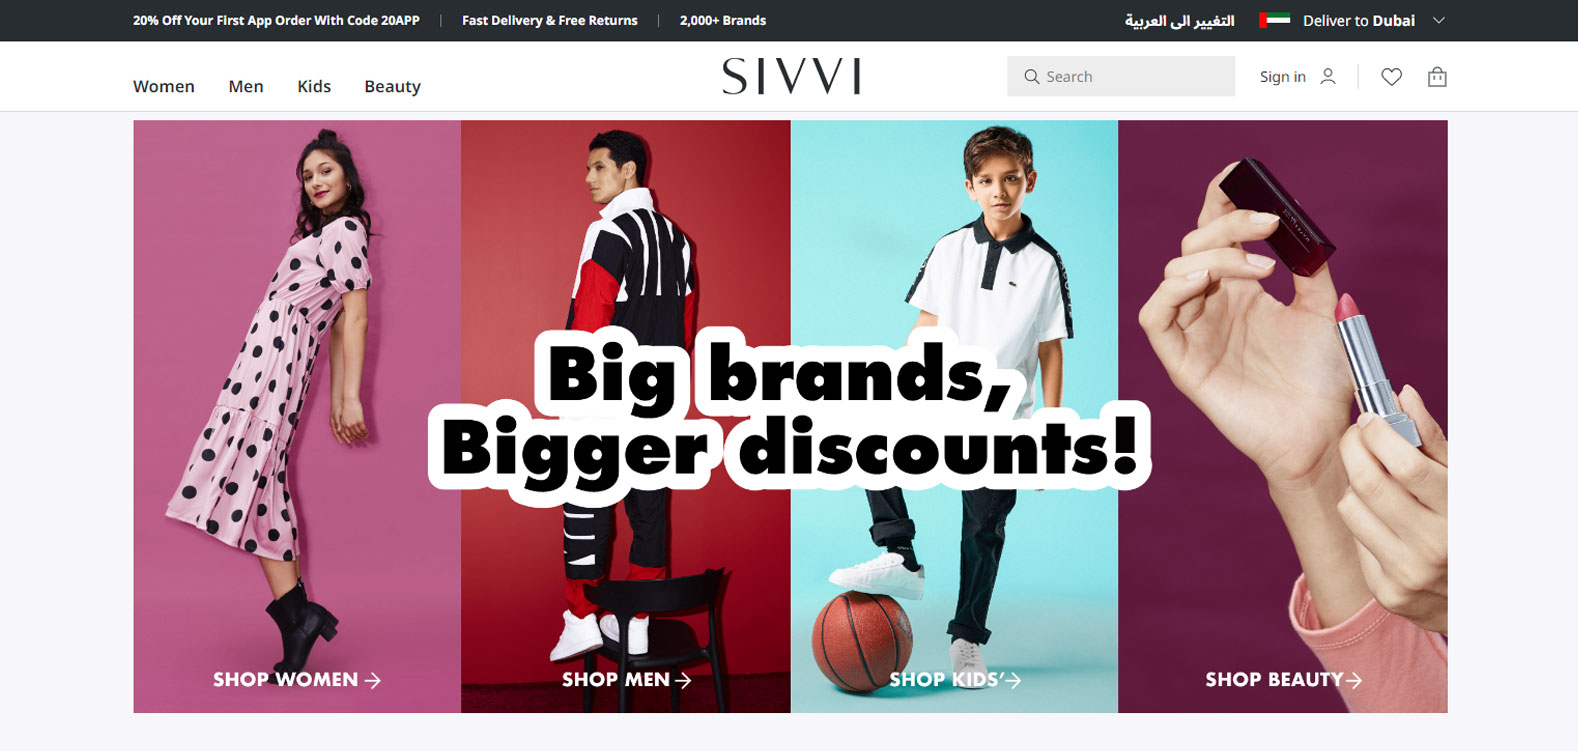 Sivvi: Leading Online Shopping With High-End Fashion